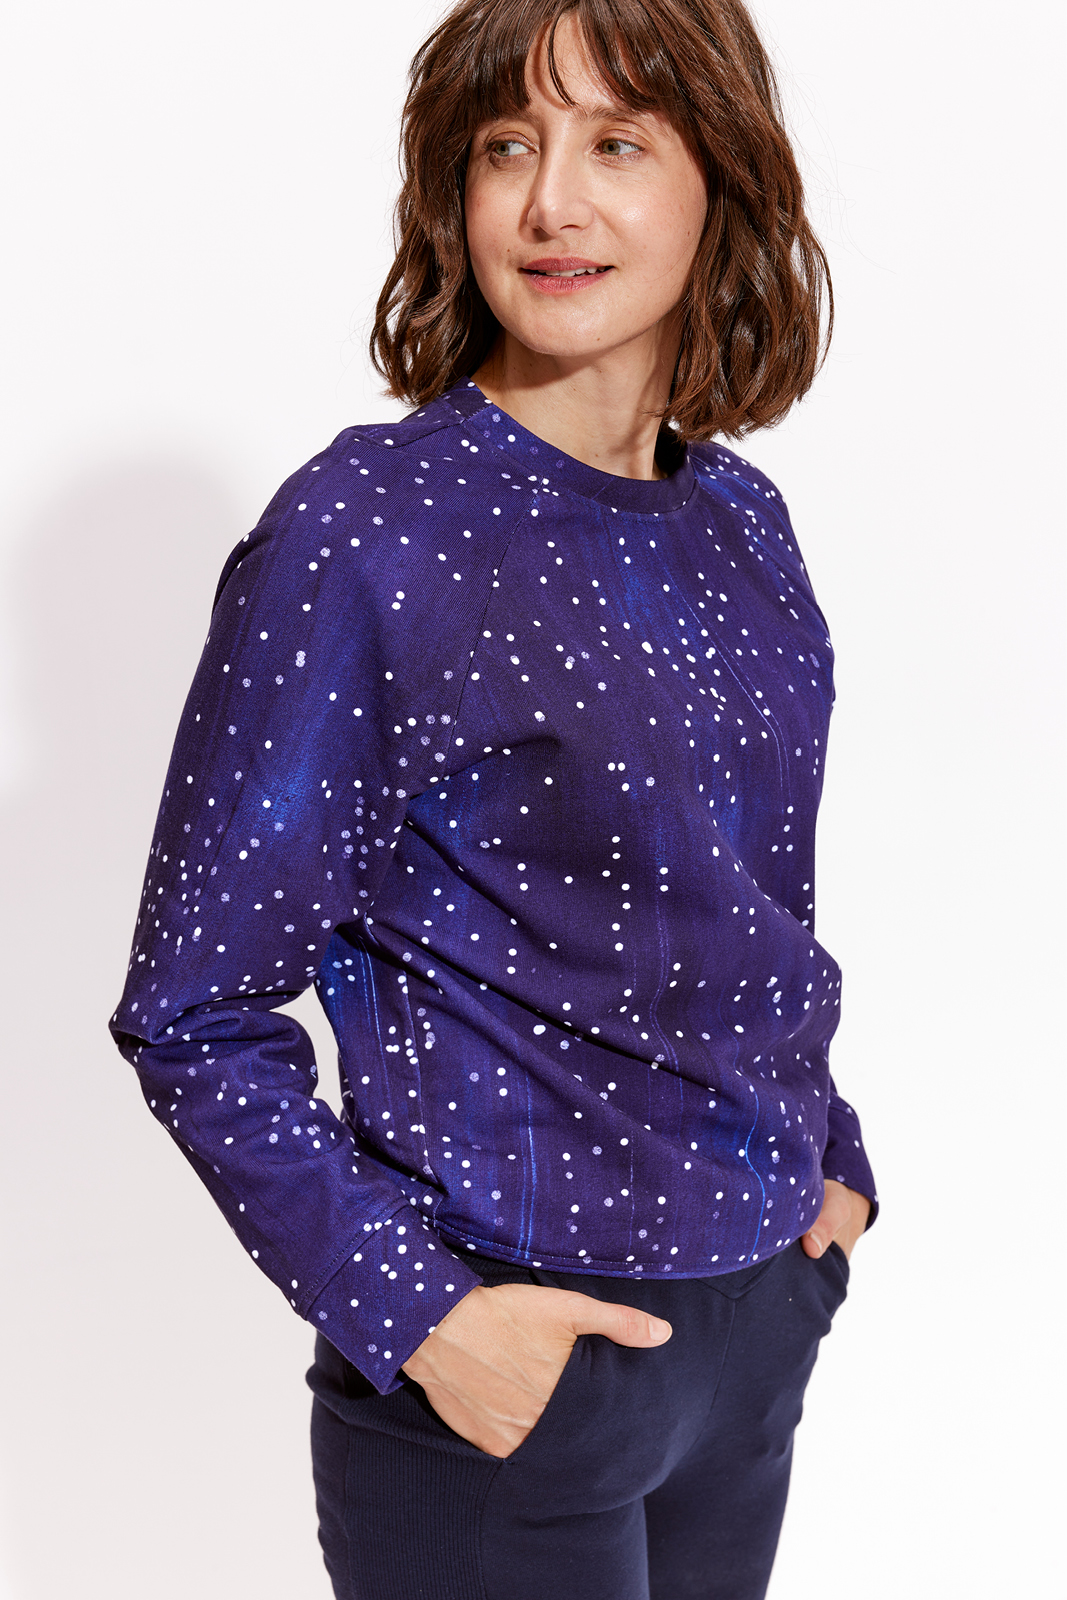 LUCY IN THE SKY snow dots print